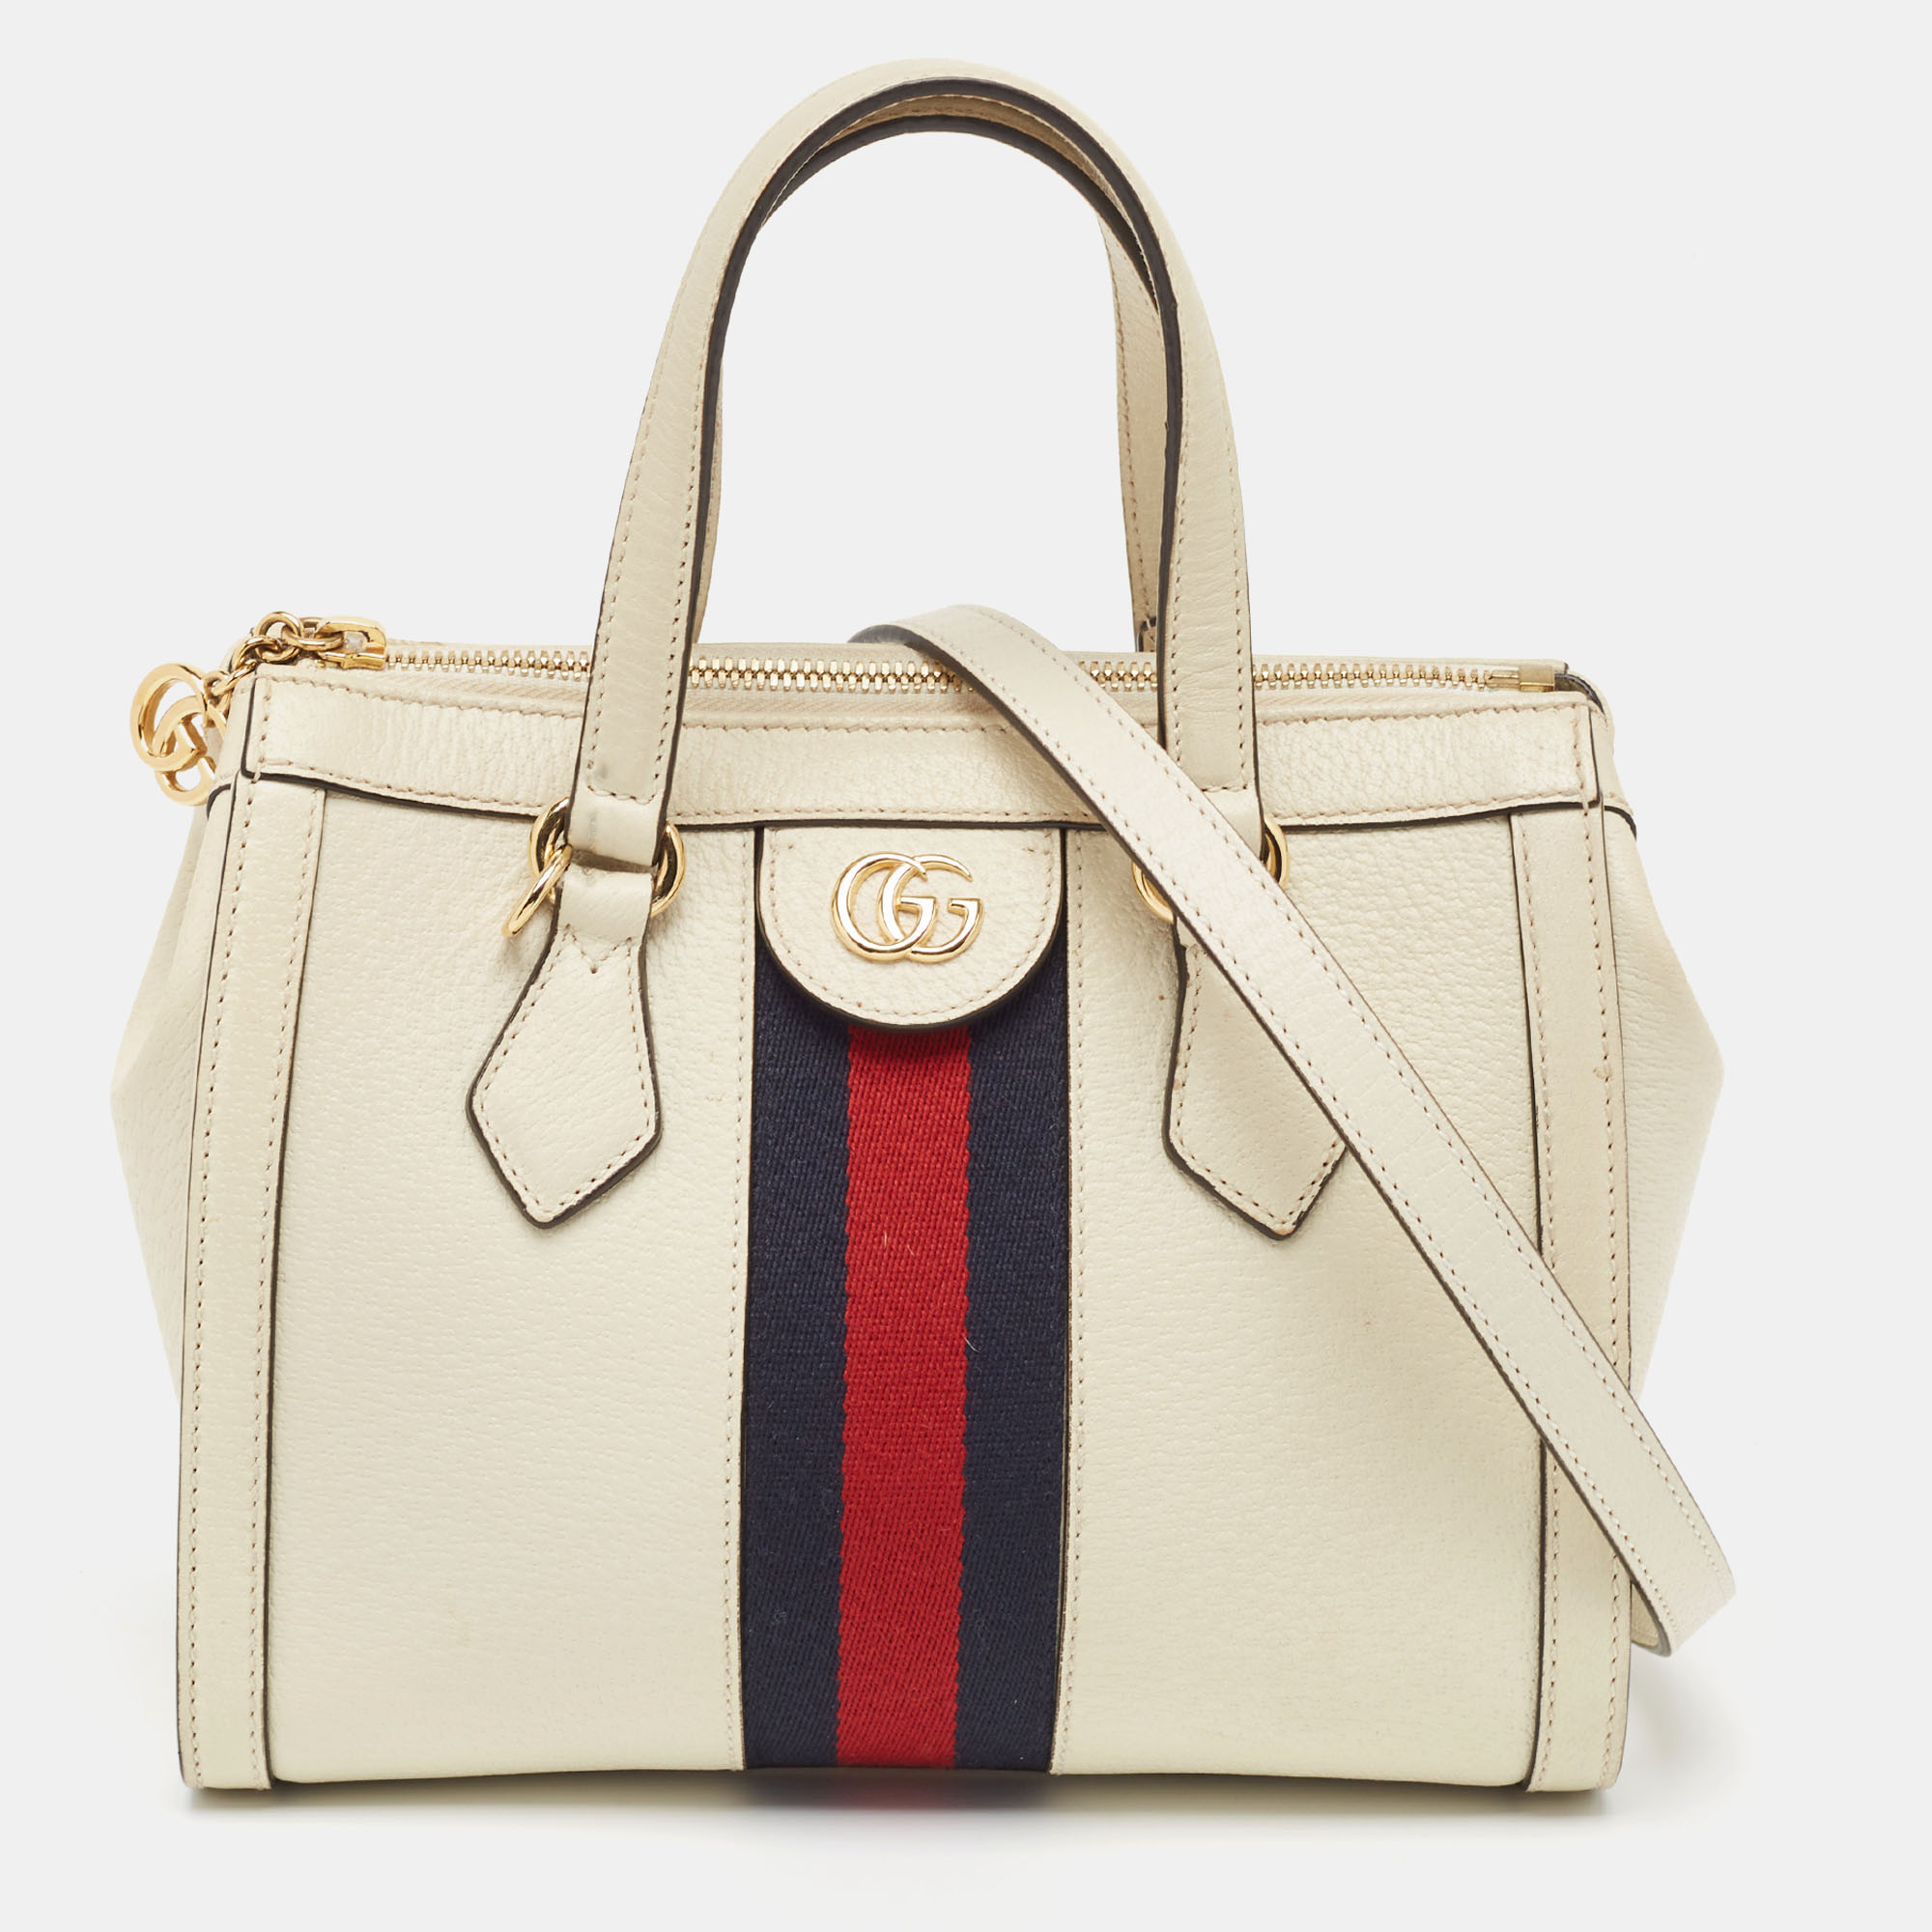 Gucci off white leather small ophidia tote